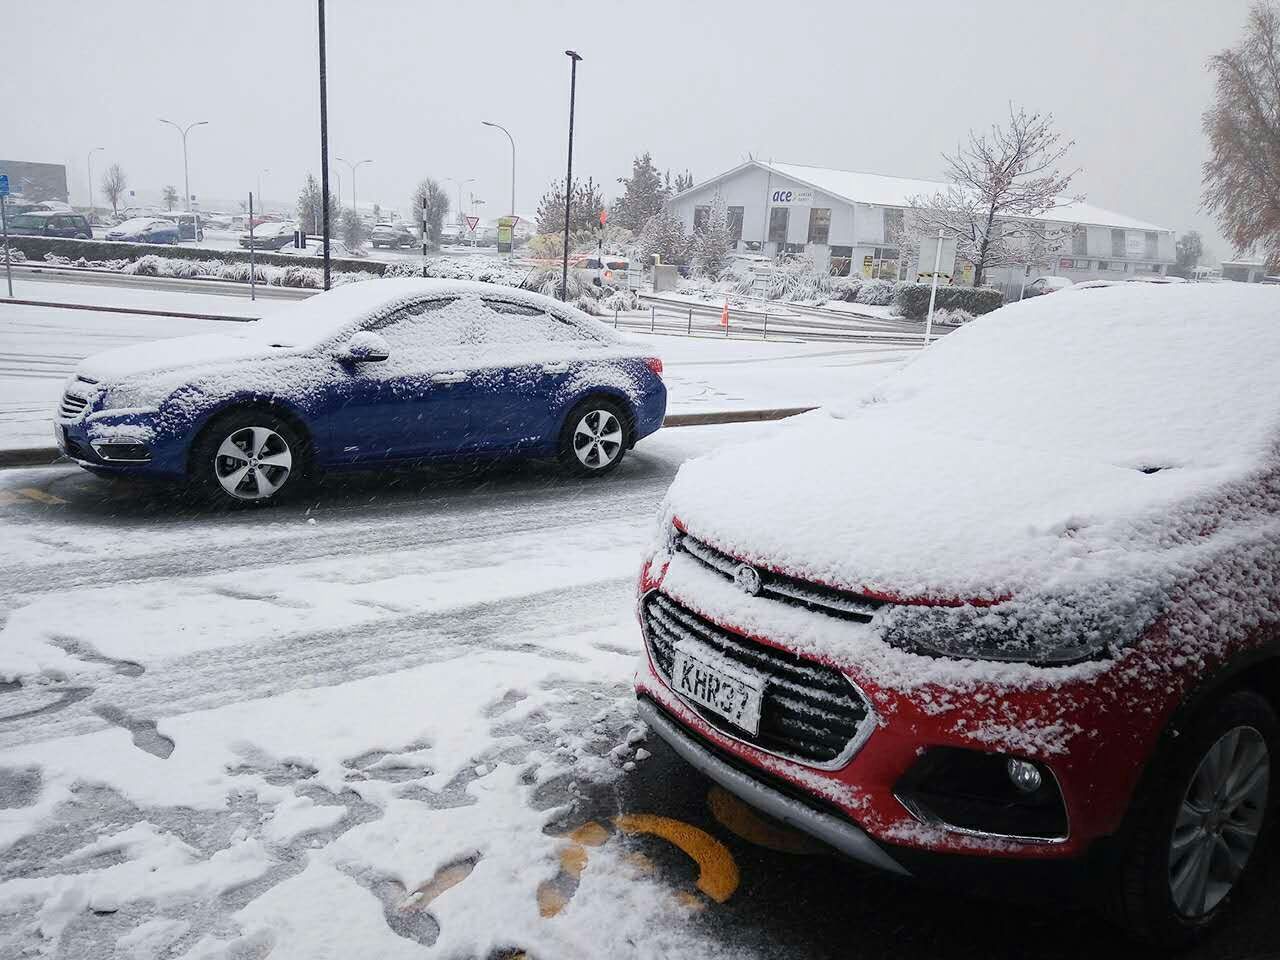 Cars covered with snow just outside the Queenstown International Airport – the Queenstown ski season had just begun!